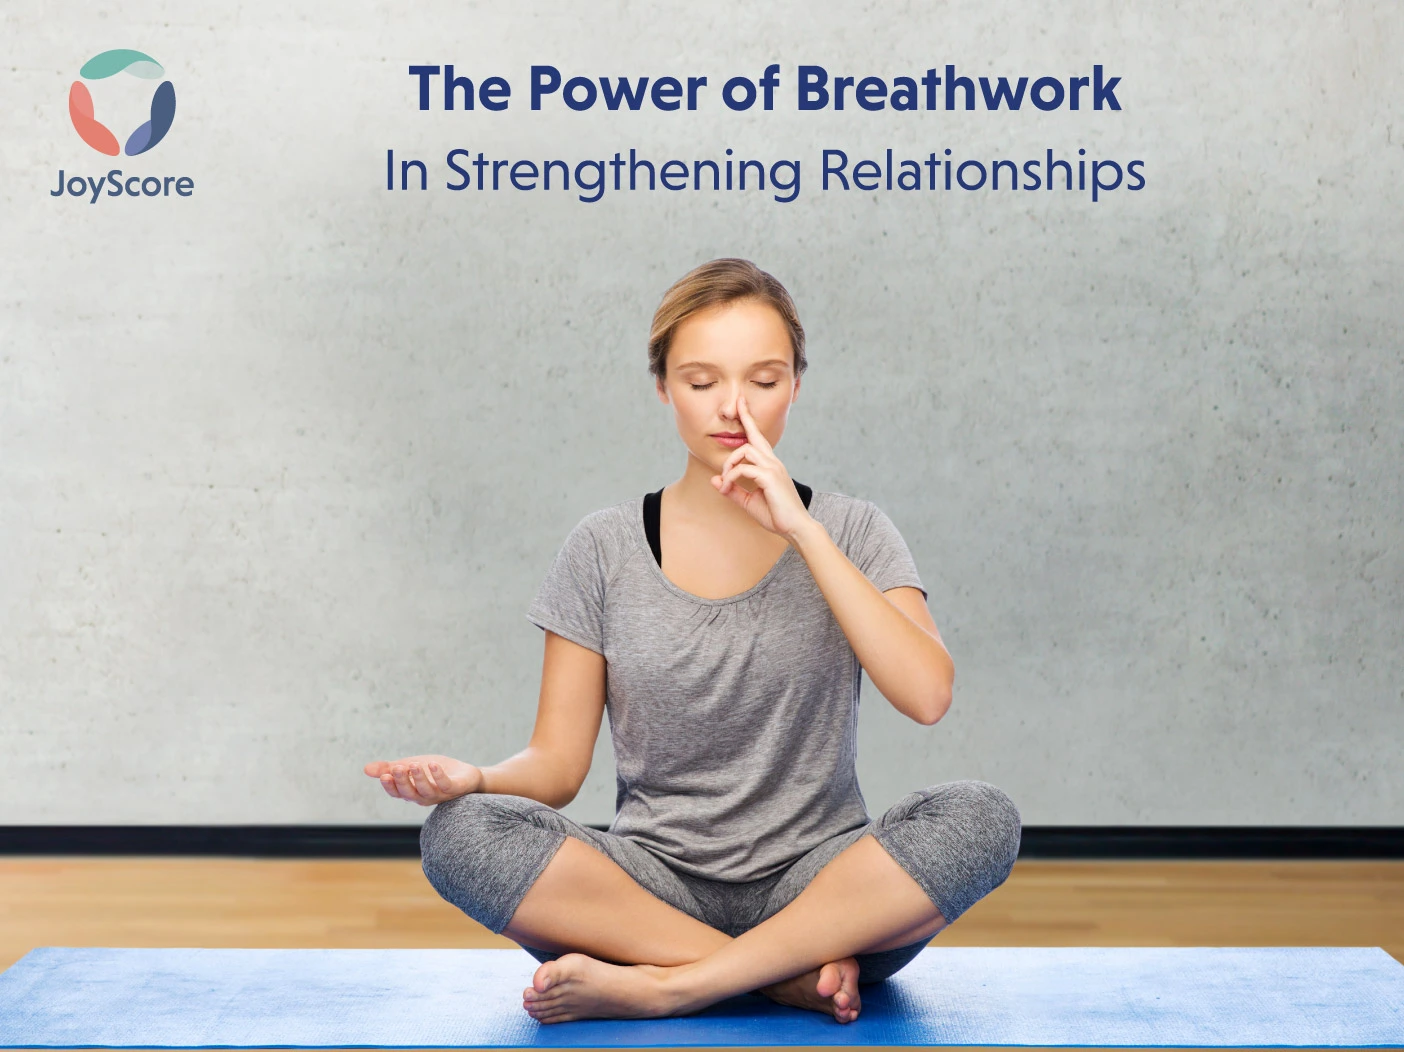 The Power of Breathwork: How Breathing Exercises Can Help Strengthen Your Relationships